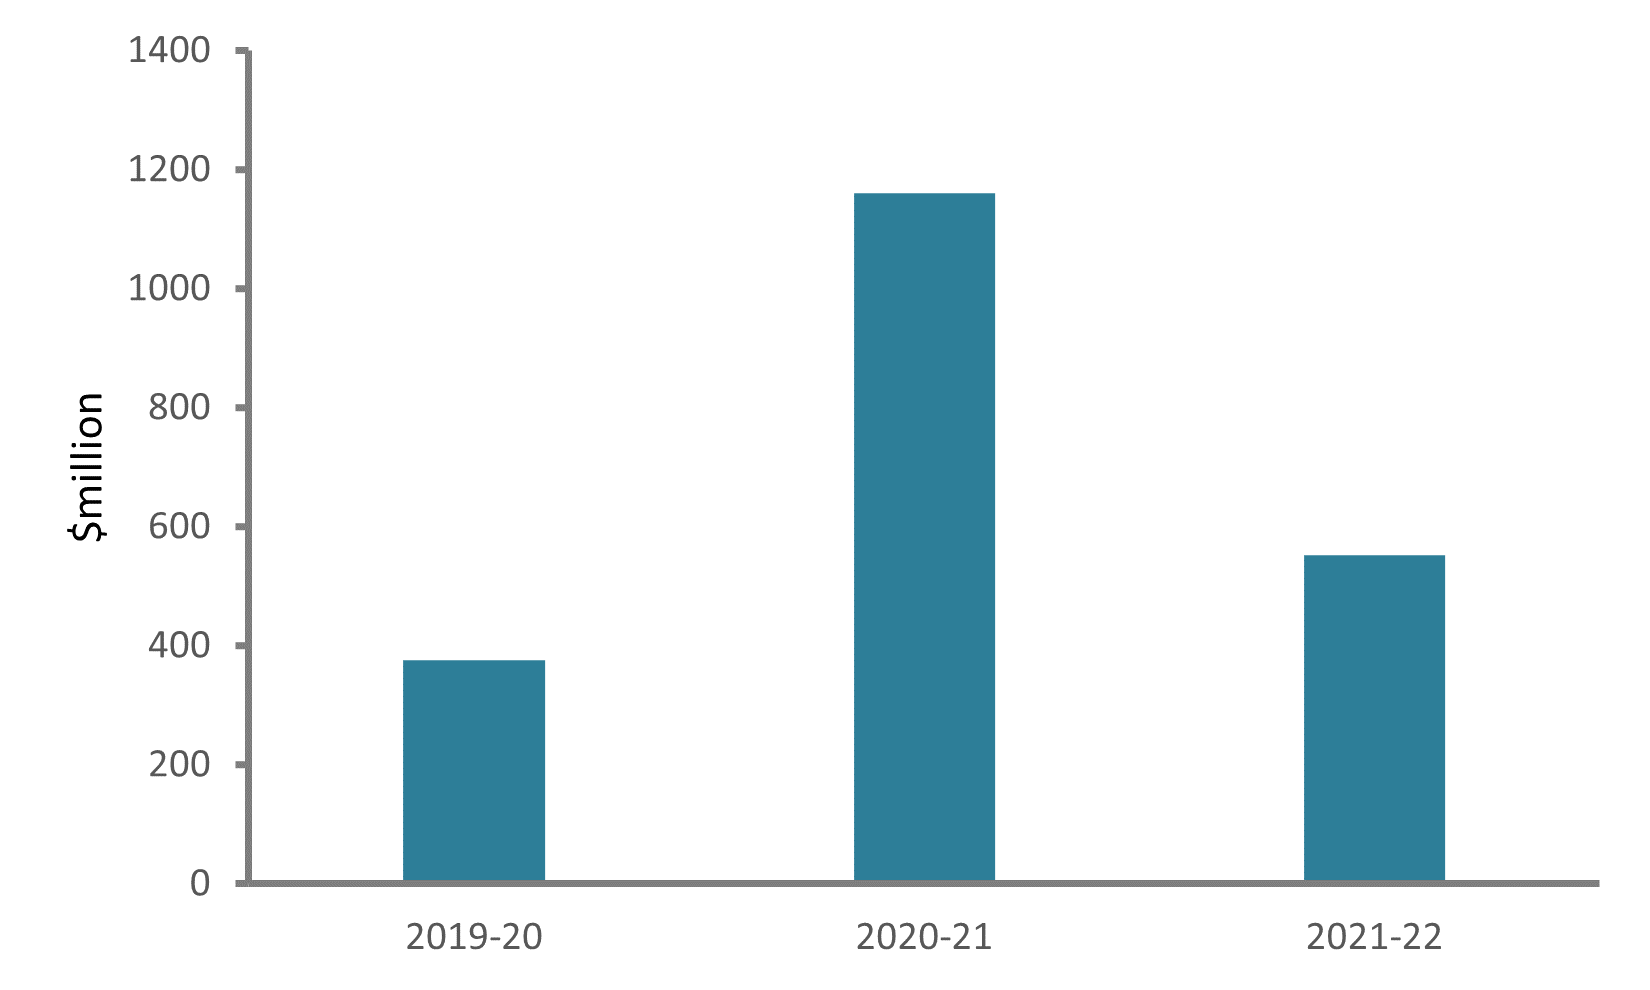 The column chart shows health-related government spending in the aged care sector for COVID from 2019-20 to 2021-22. The highest spending was in the year 2020-21.